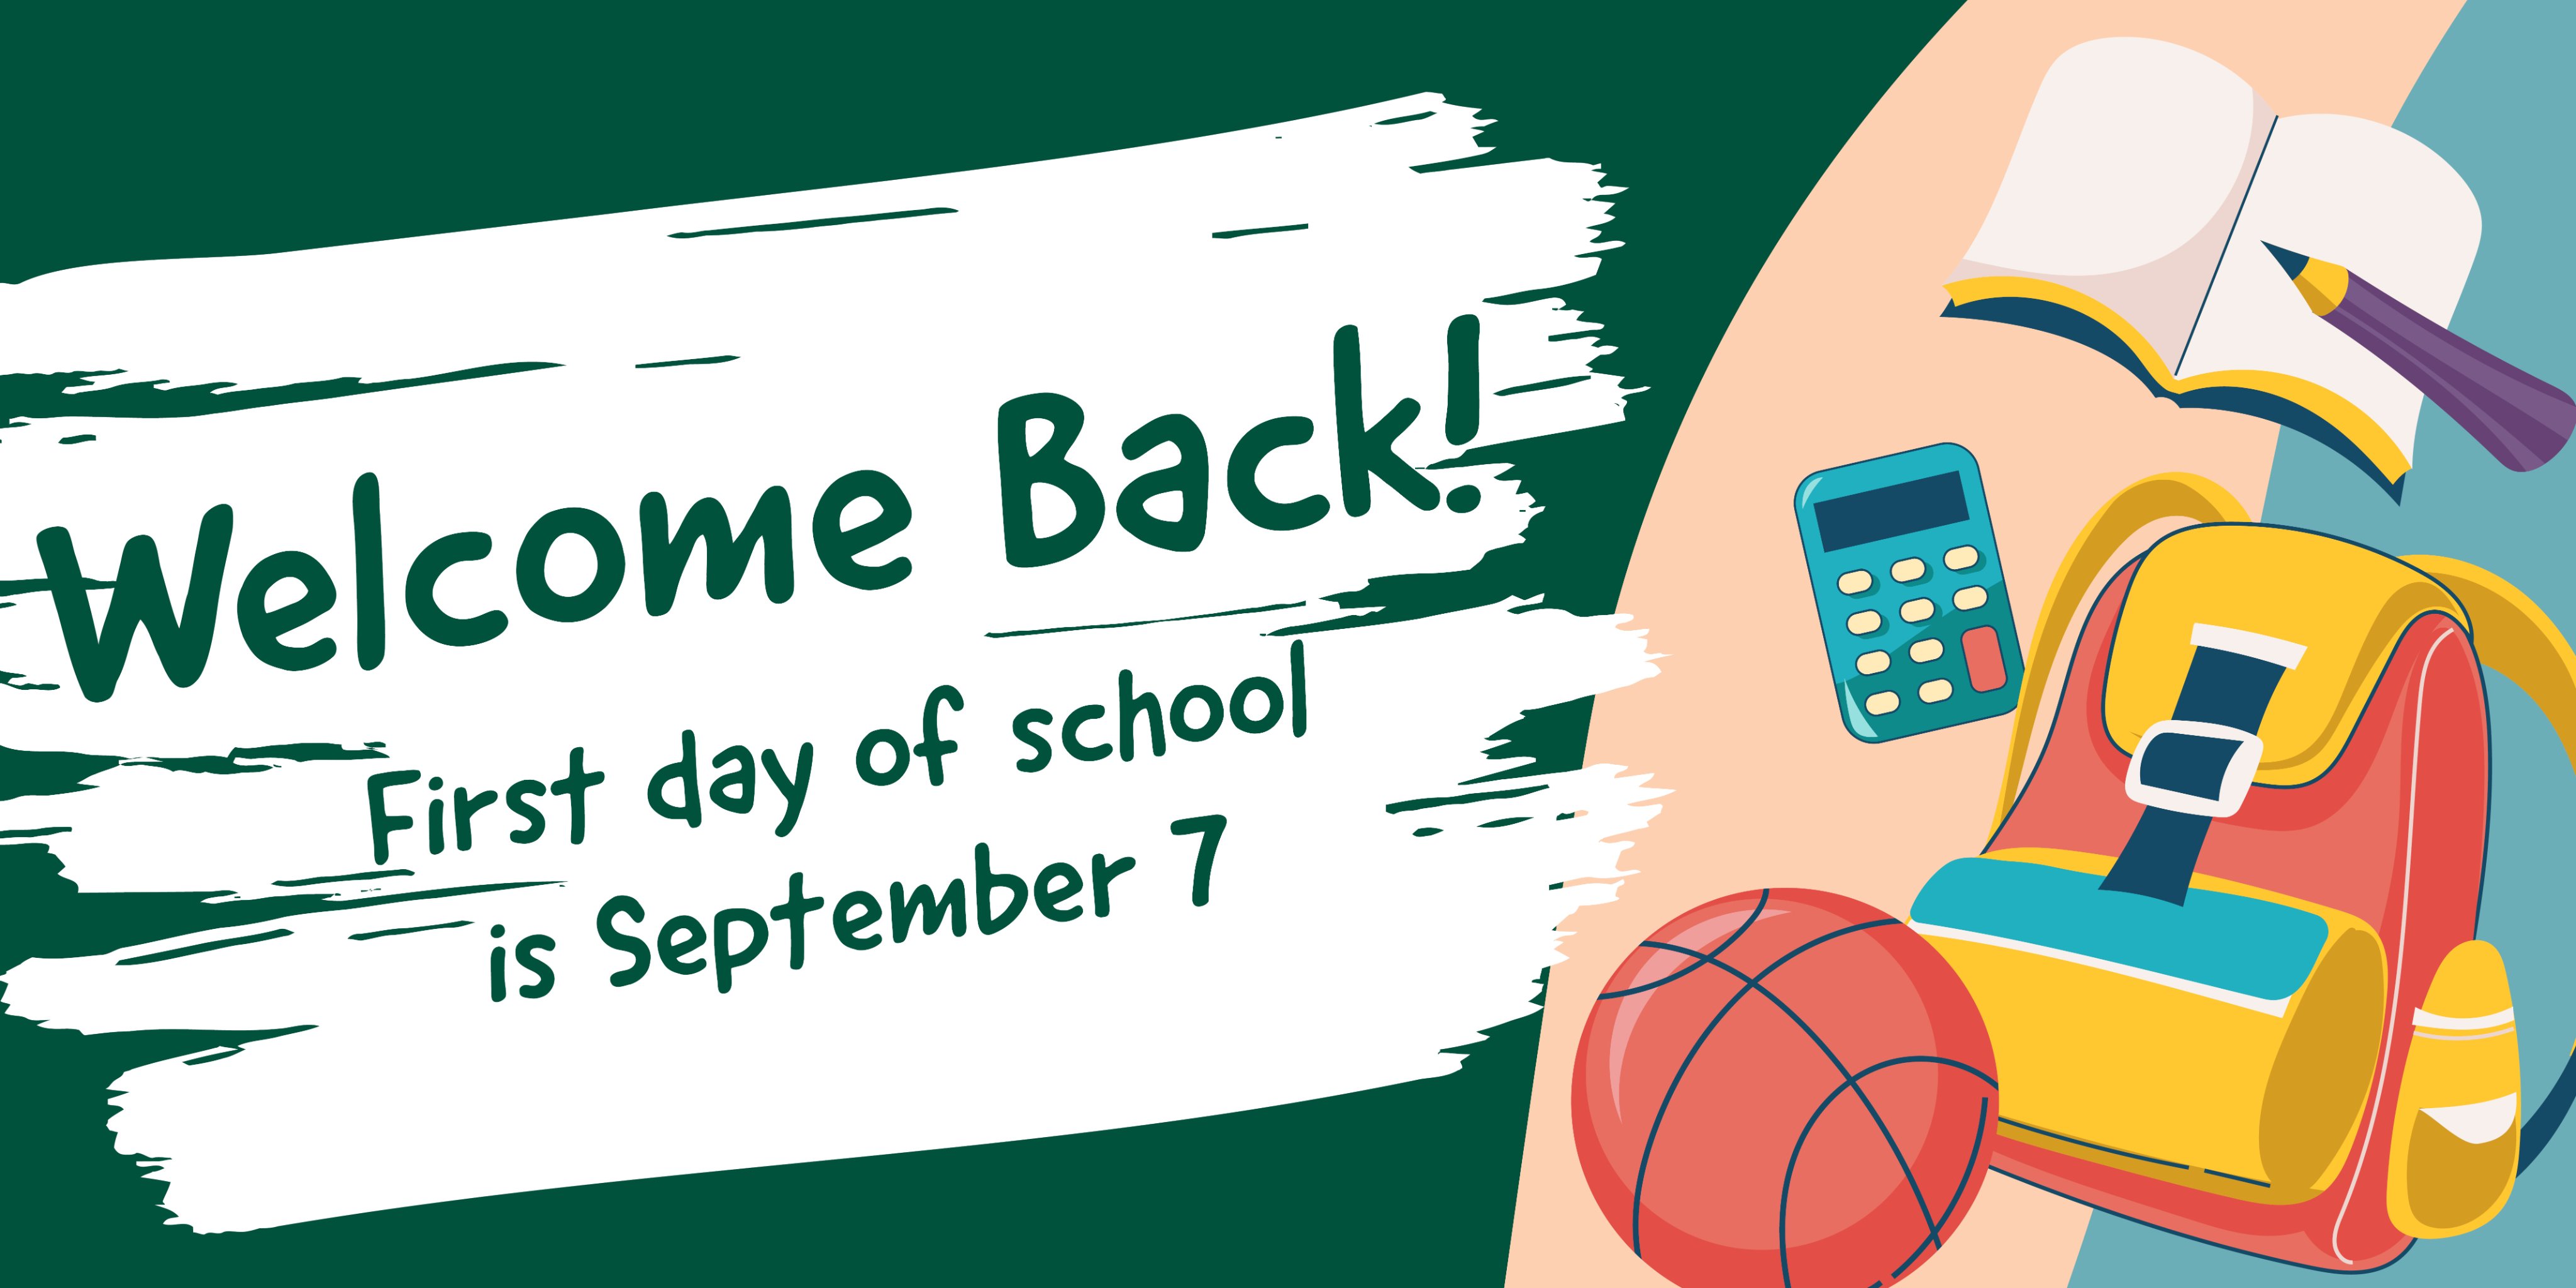 Lambton Kent DSB on X: We are excited to welcome students back to school  for the 2021-2022 school year! The first day of school is Tuesday, September  7.  / X